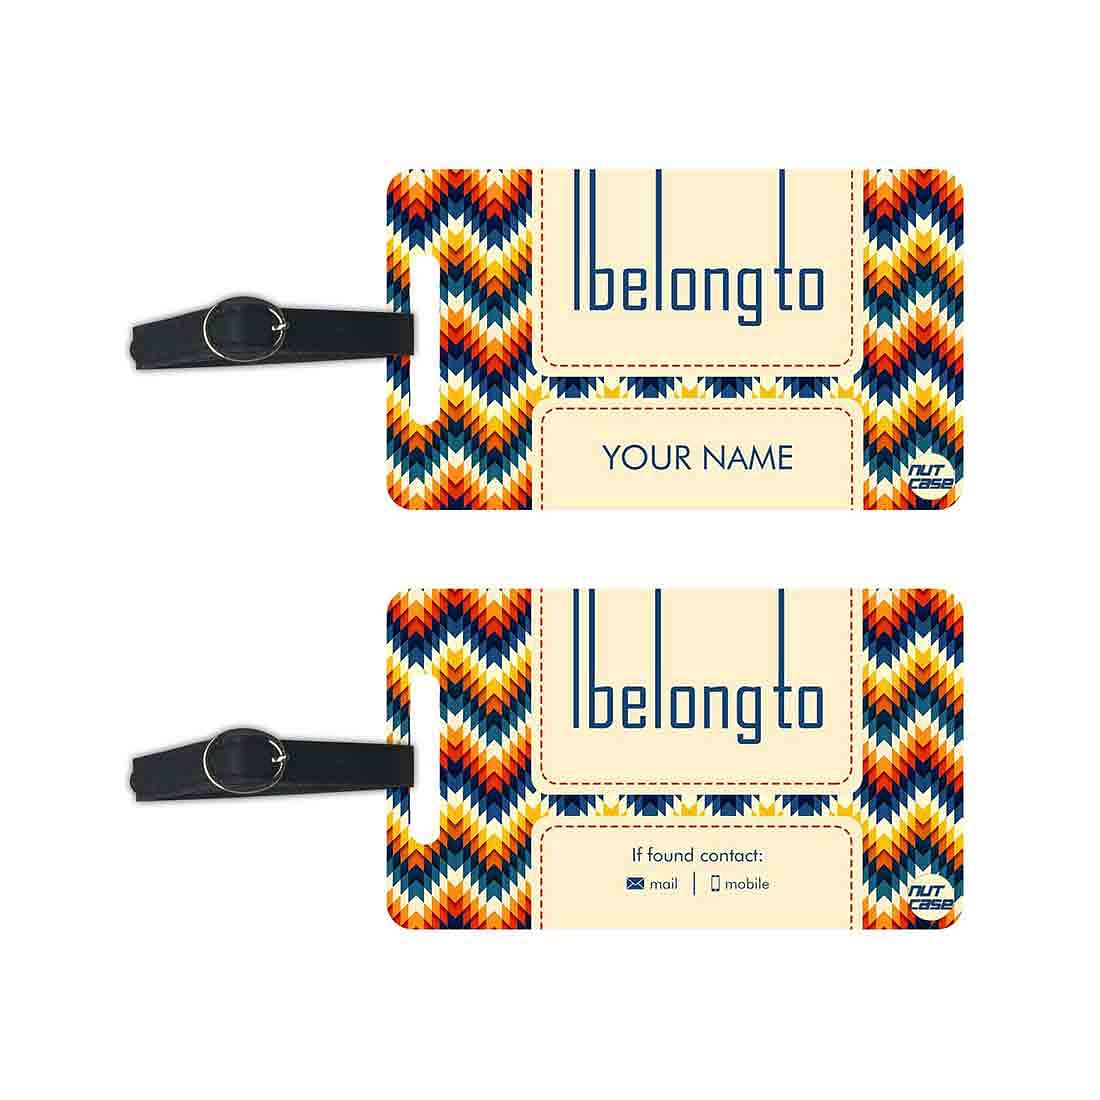 Personalized Printed Suitcase Luggage Tags - Add your Name - Set of 2 Nutcase